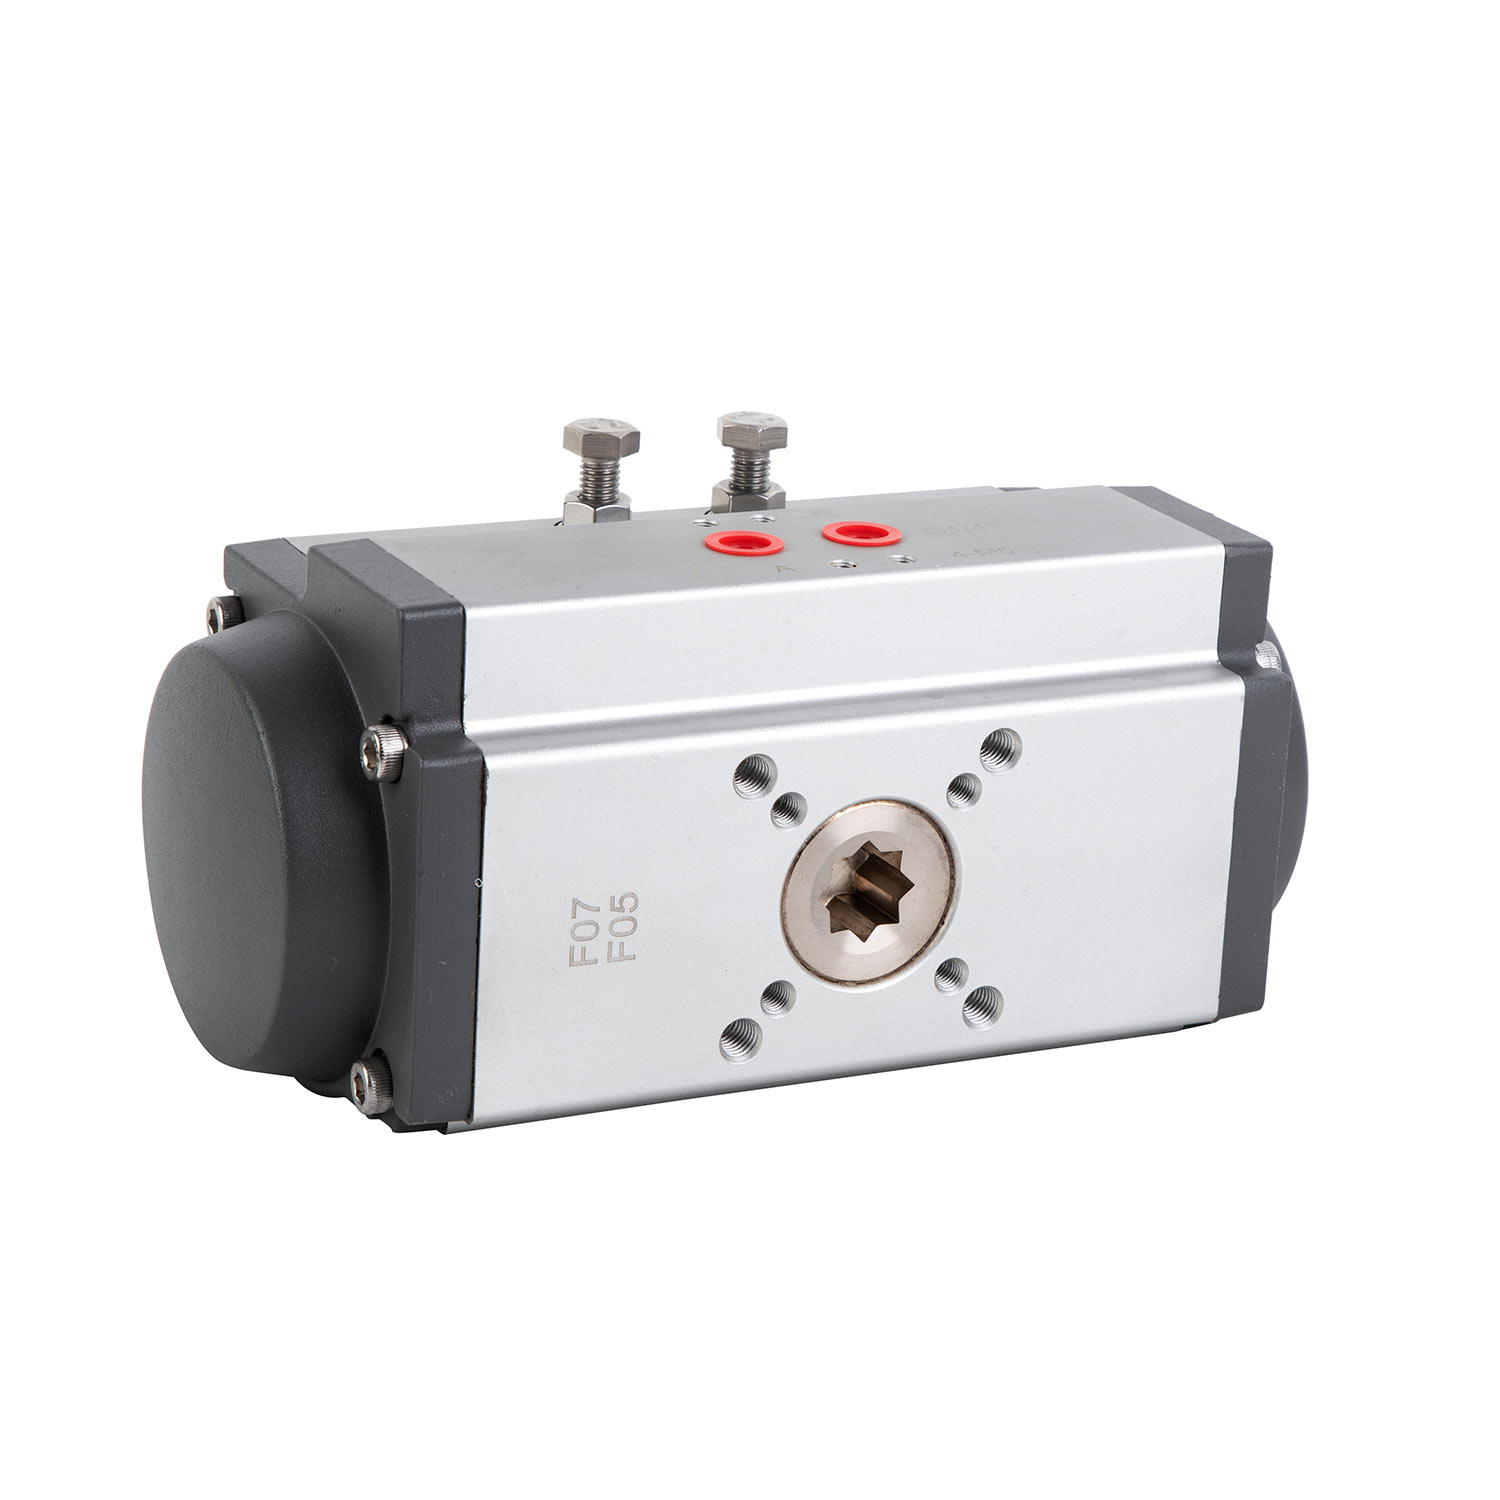 Rack And Pinion Rotary Actuator Powering Efficiency And Precision In Industrial Automation (1)pdb